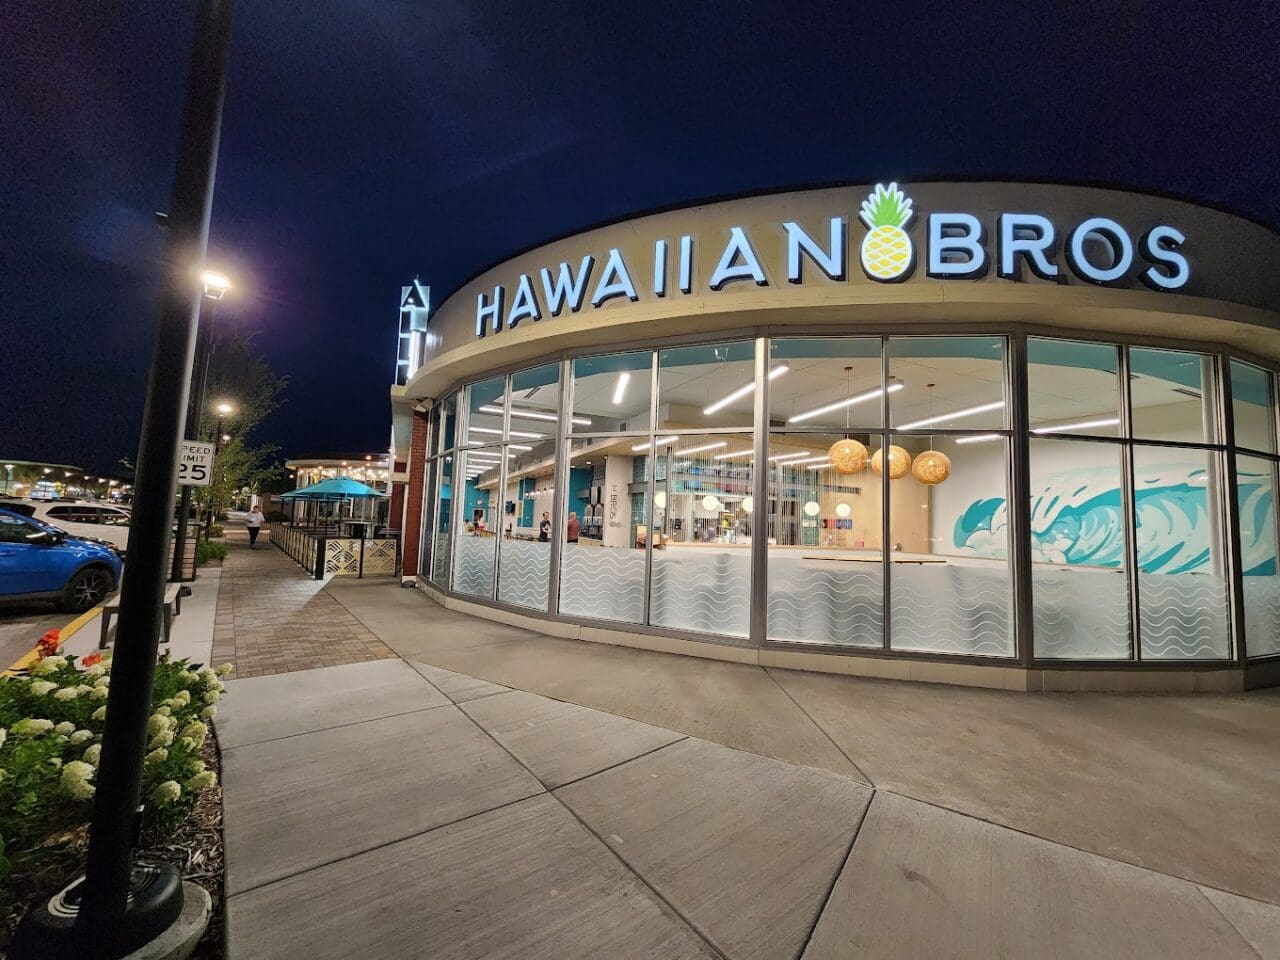 the exterior of a Hawaiian bros restaurant. It's night and the restaurant is lit up.